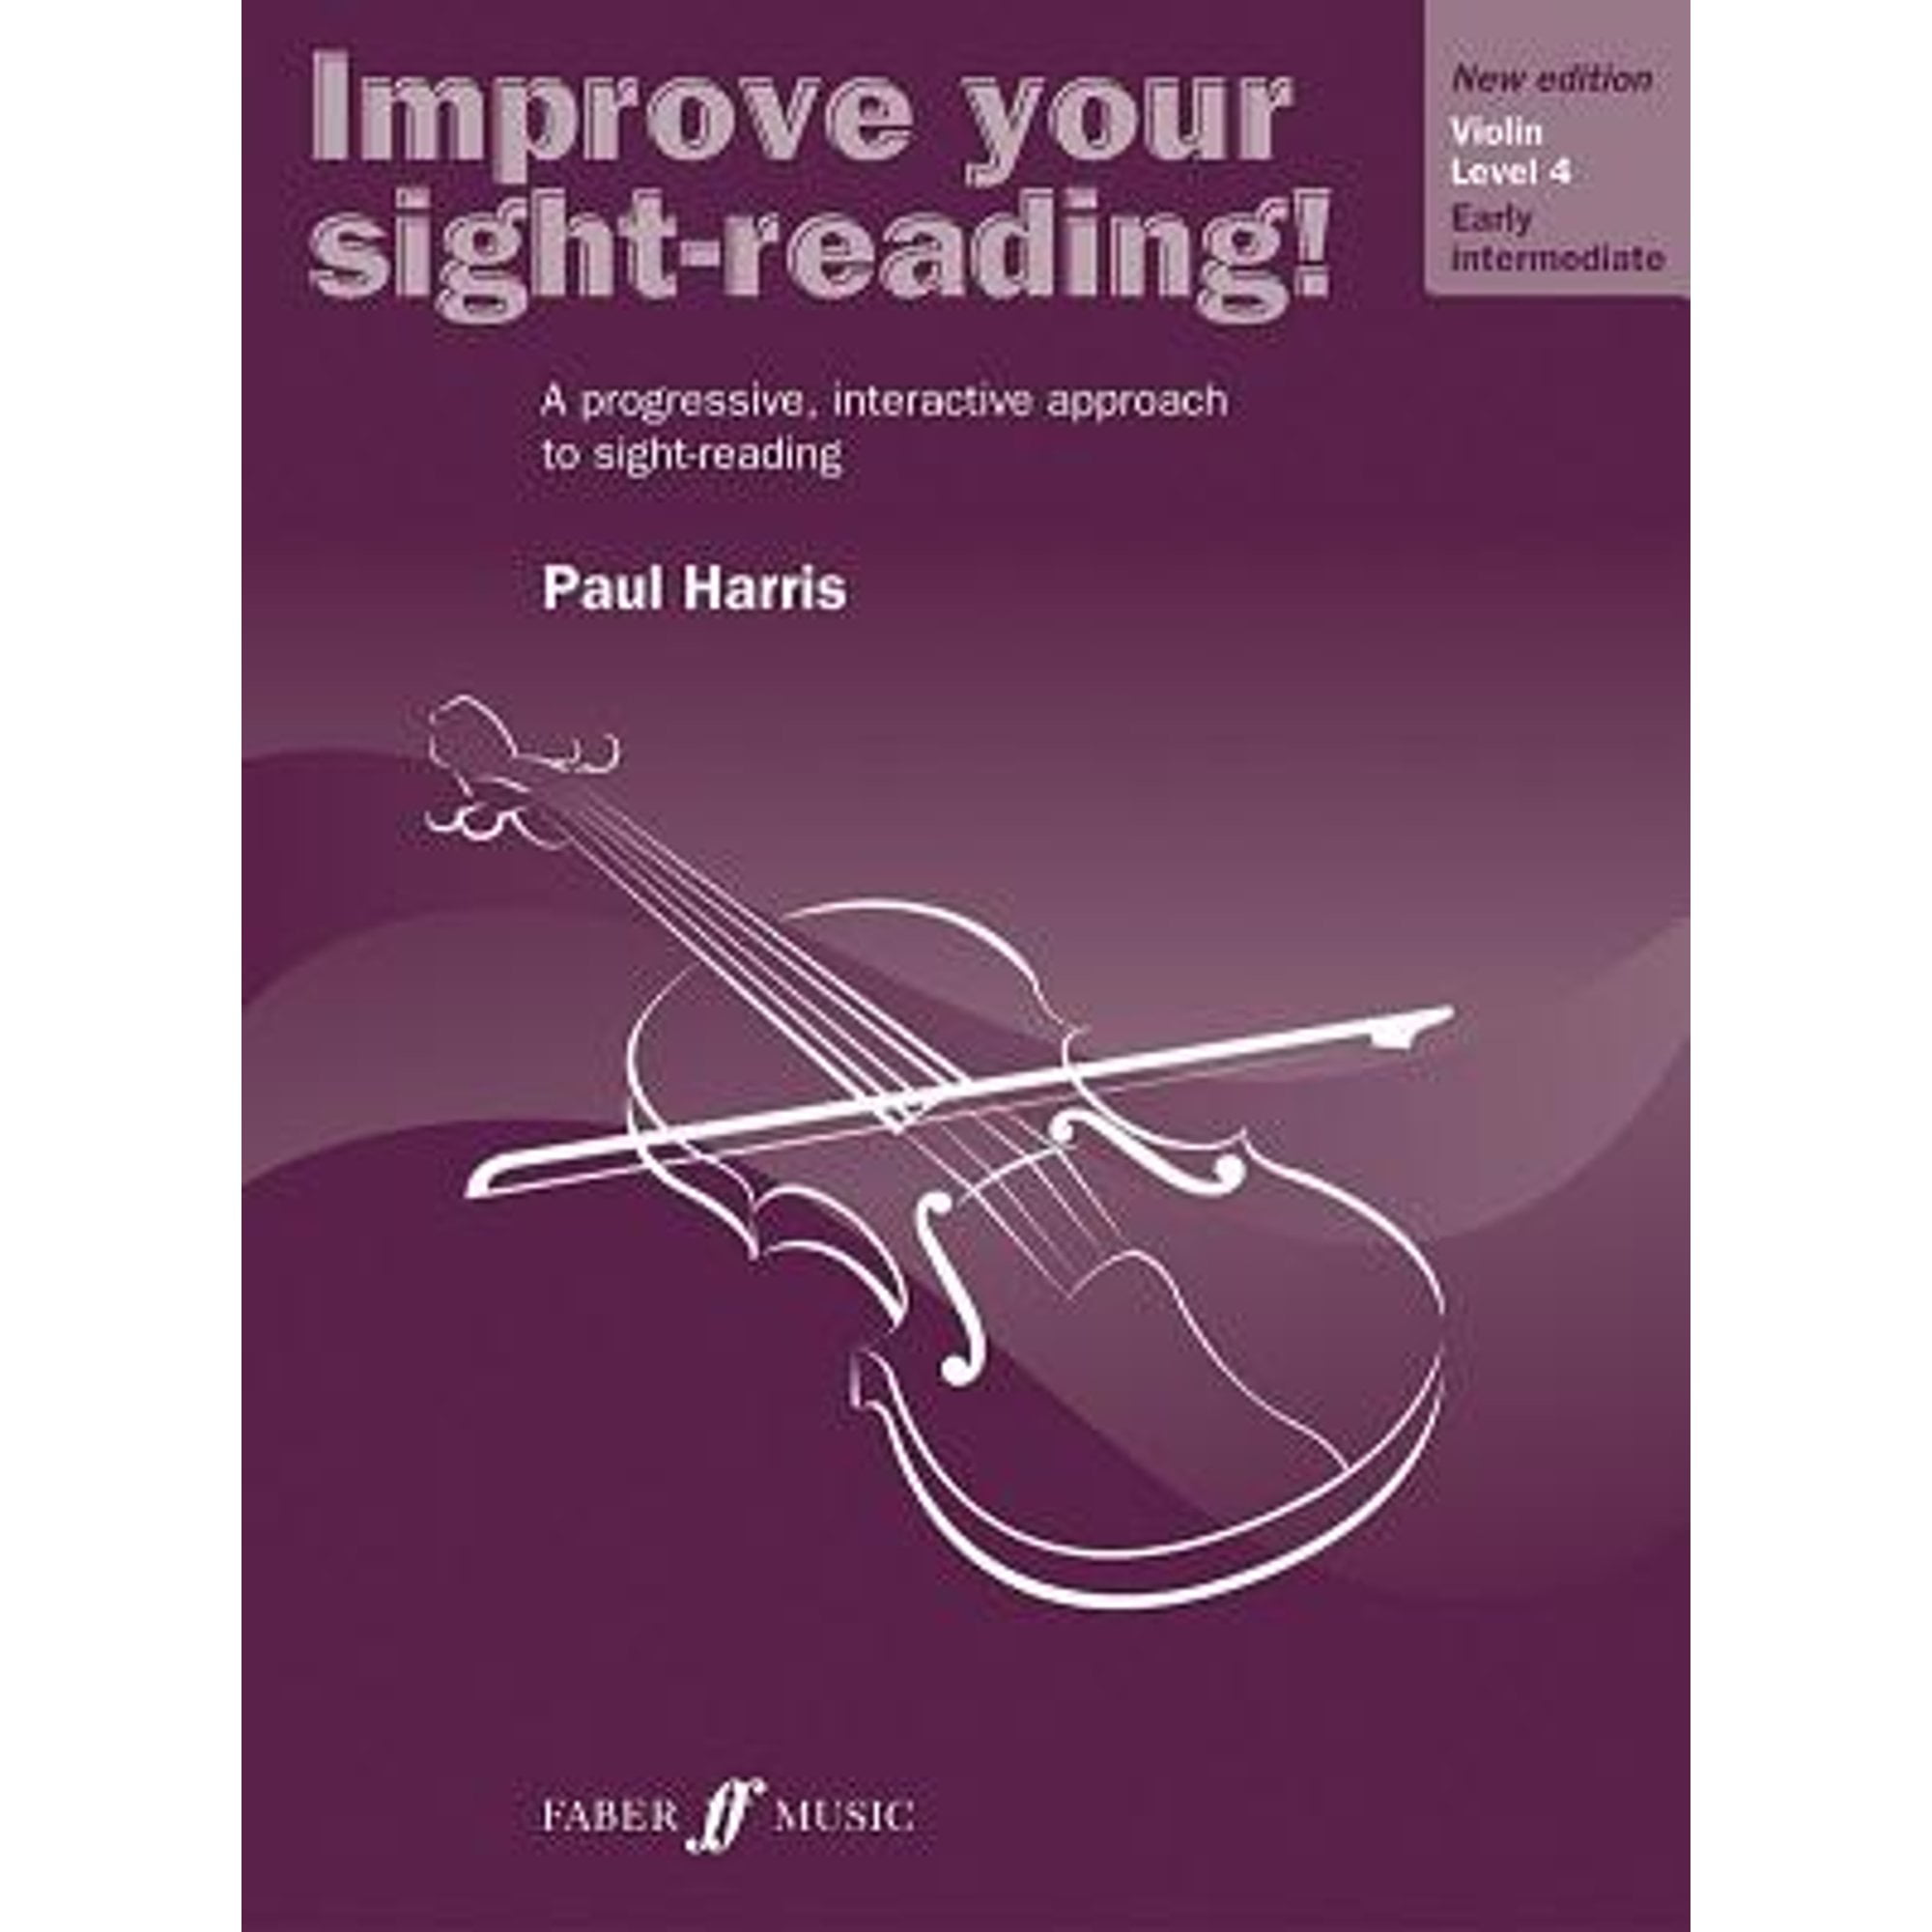 Pre-Owned Improve Your Sight-Reading! Violin Level 4 US EDITION (New Ed.) (Paperback 9780571536641) by Paul Harris